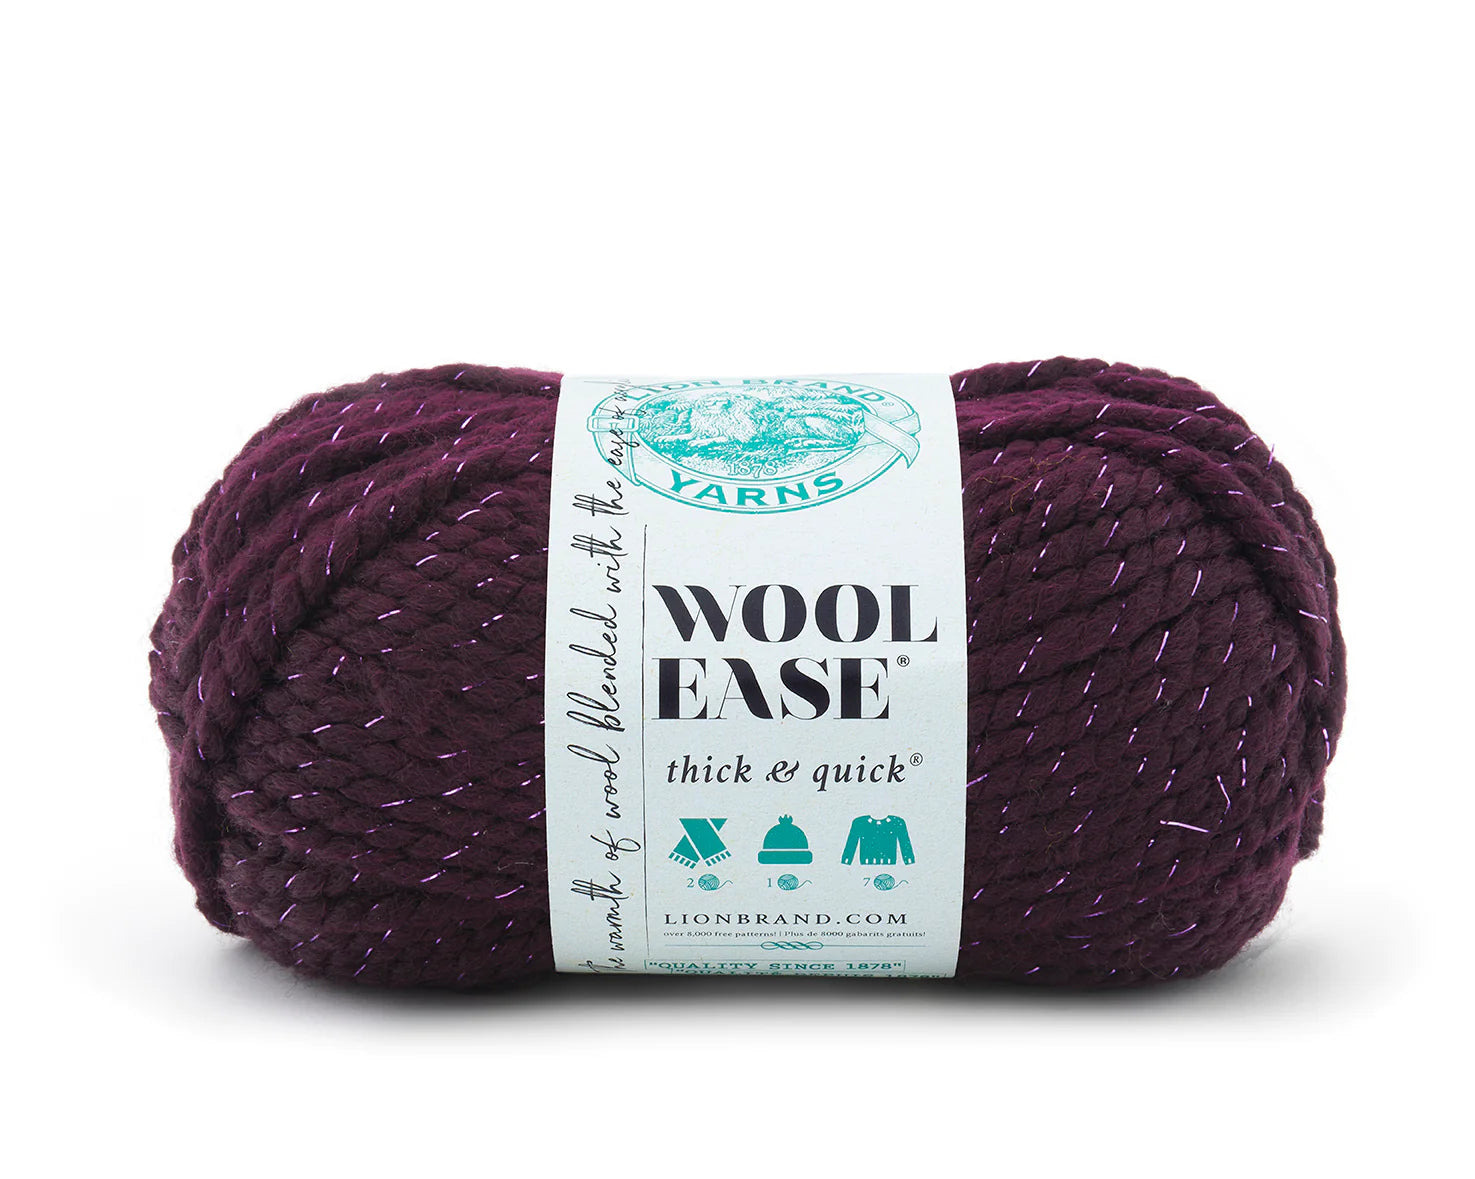 Lion Brand Wool-Ease Thick & Quick Yarn-Glacier, 1 count - Jay C Food Stores